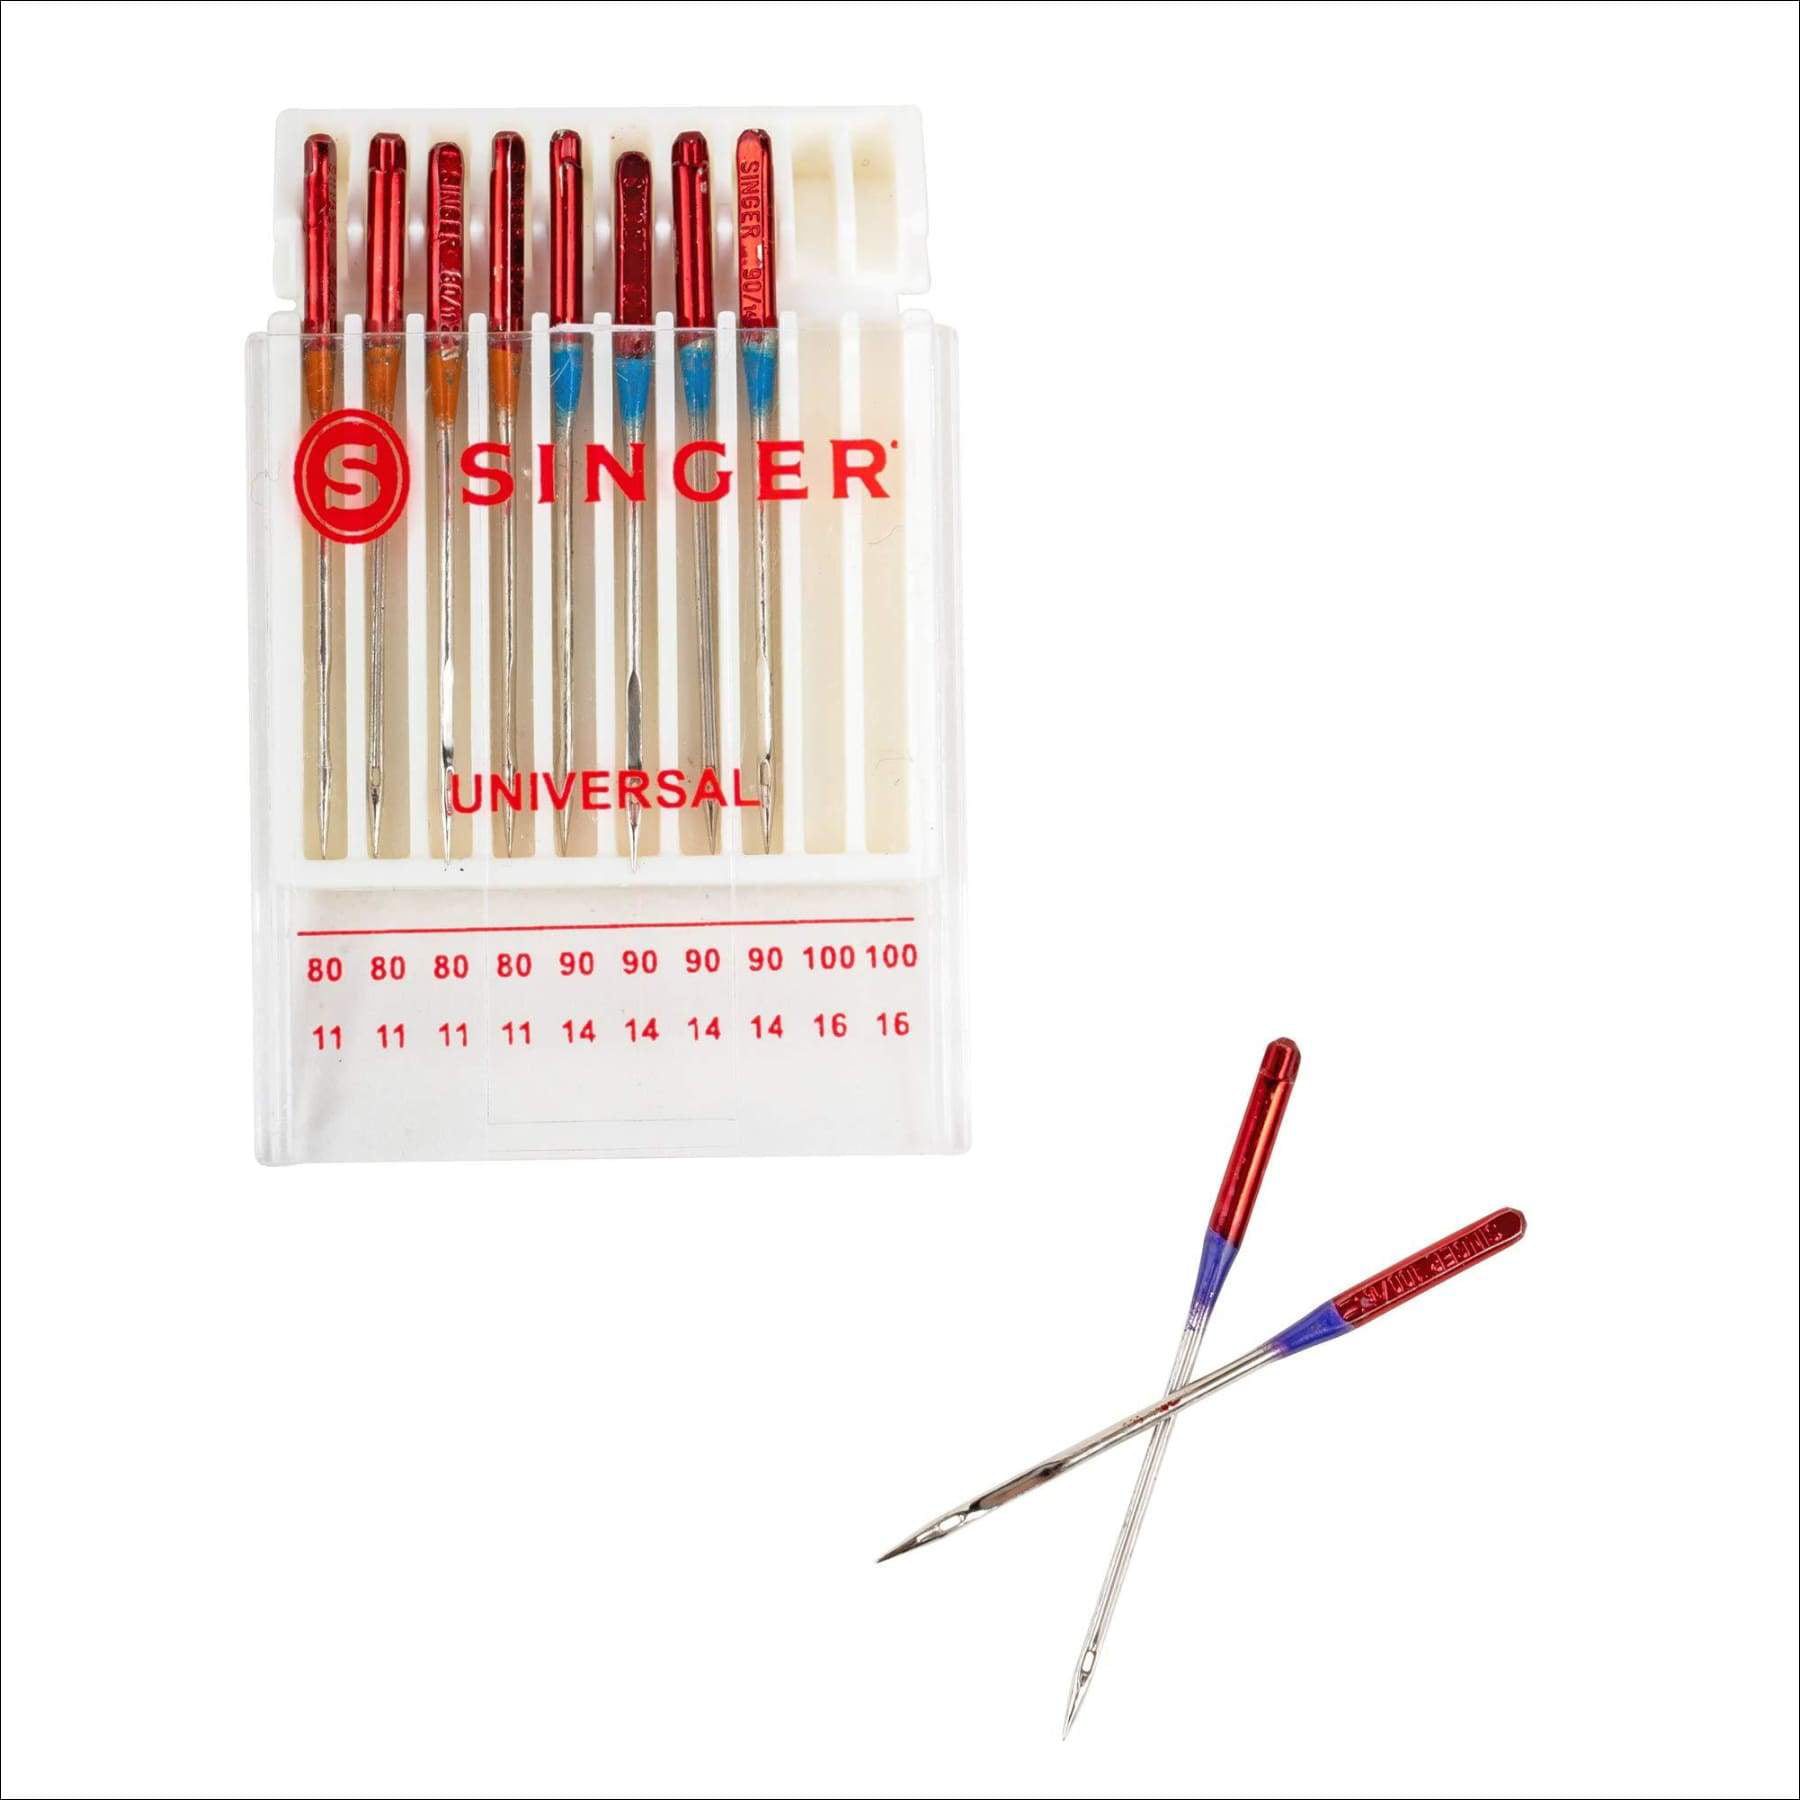 Singer Needles for Sewing Machine Assortment 10 Needles 70 80 90